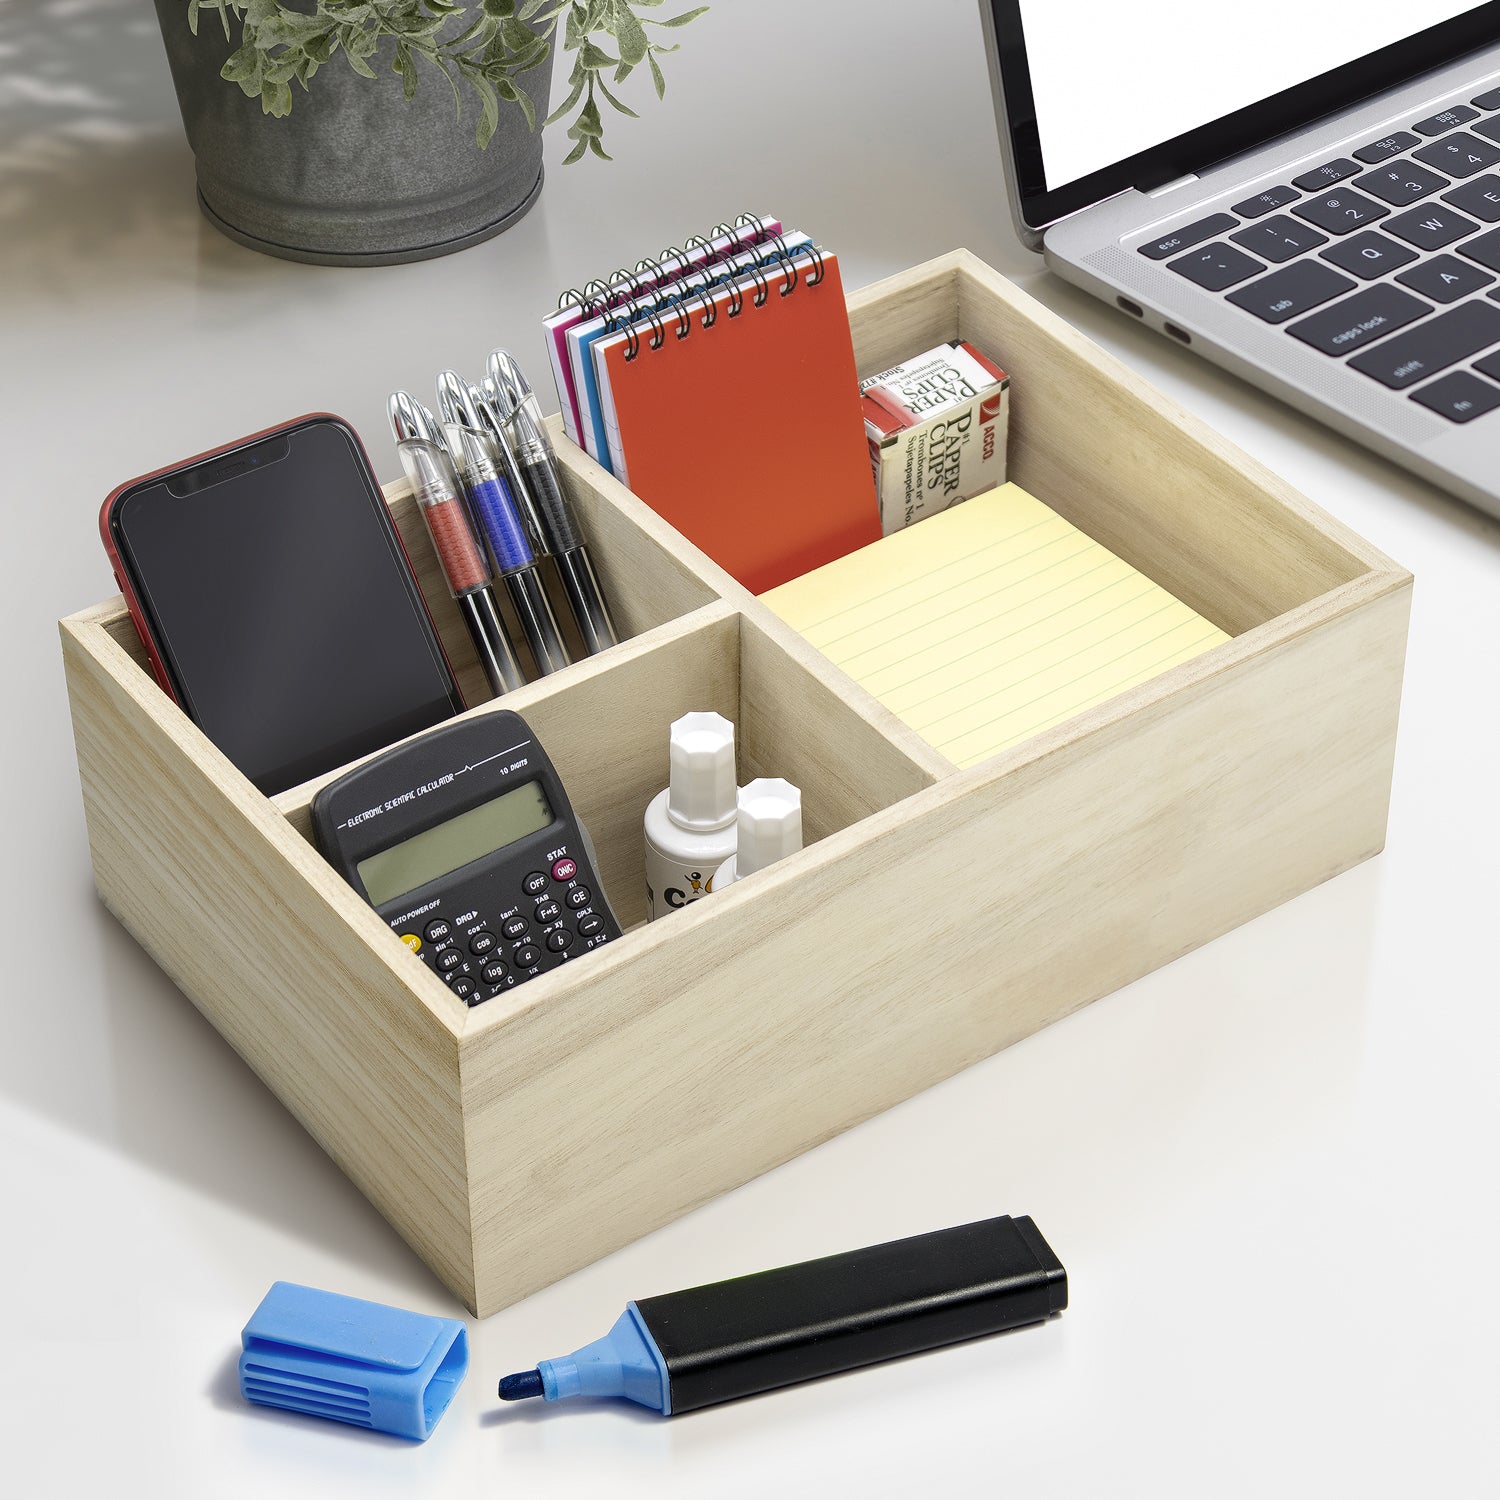 3-Compartment Organizer Box (Unfinished Wood)